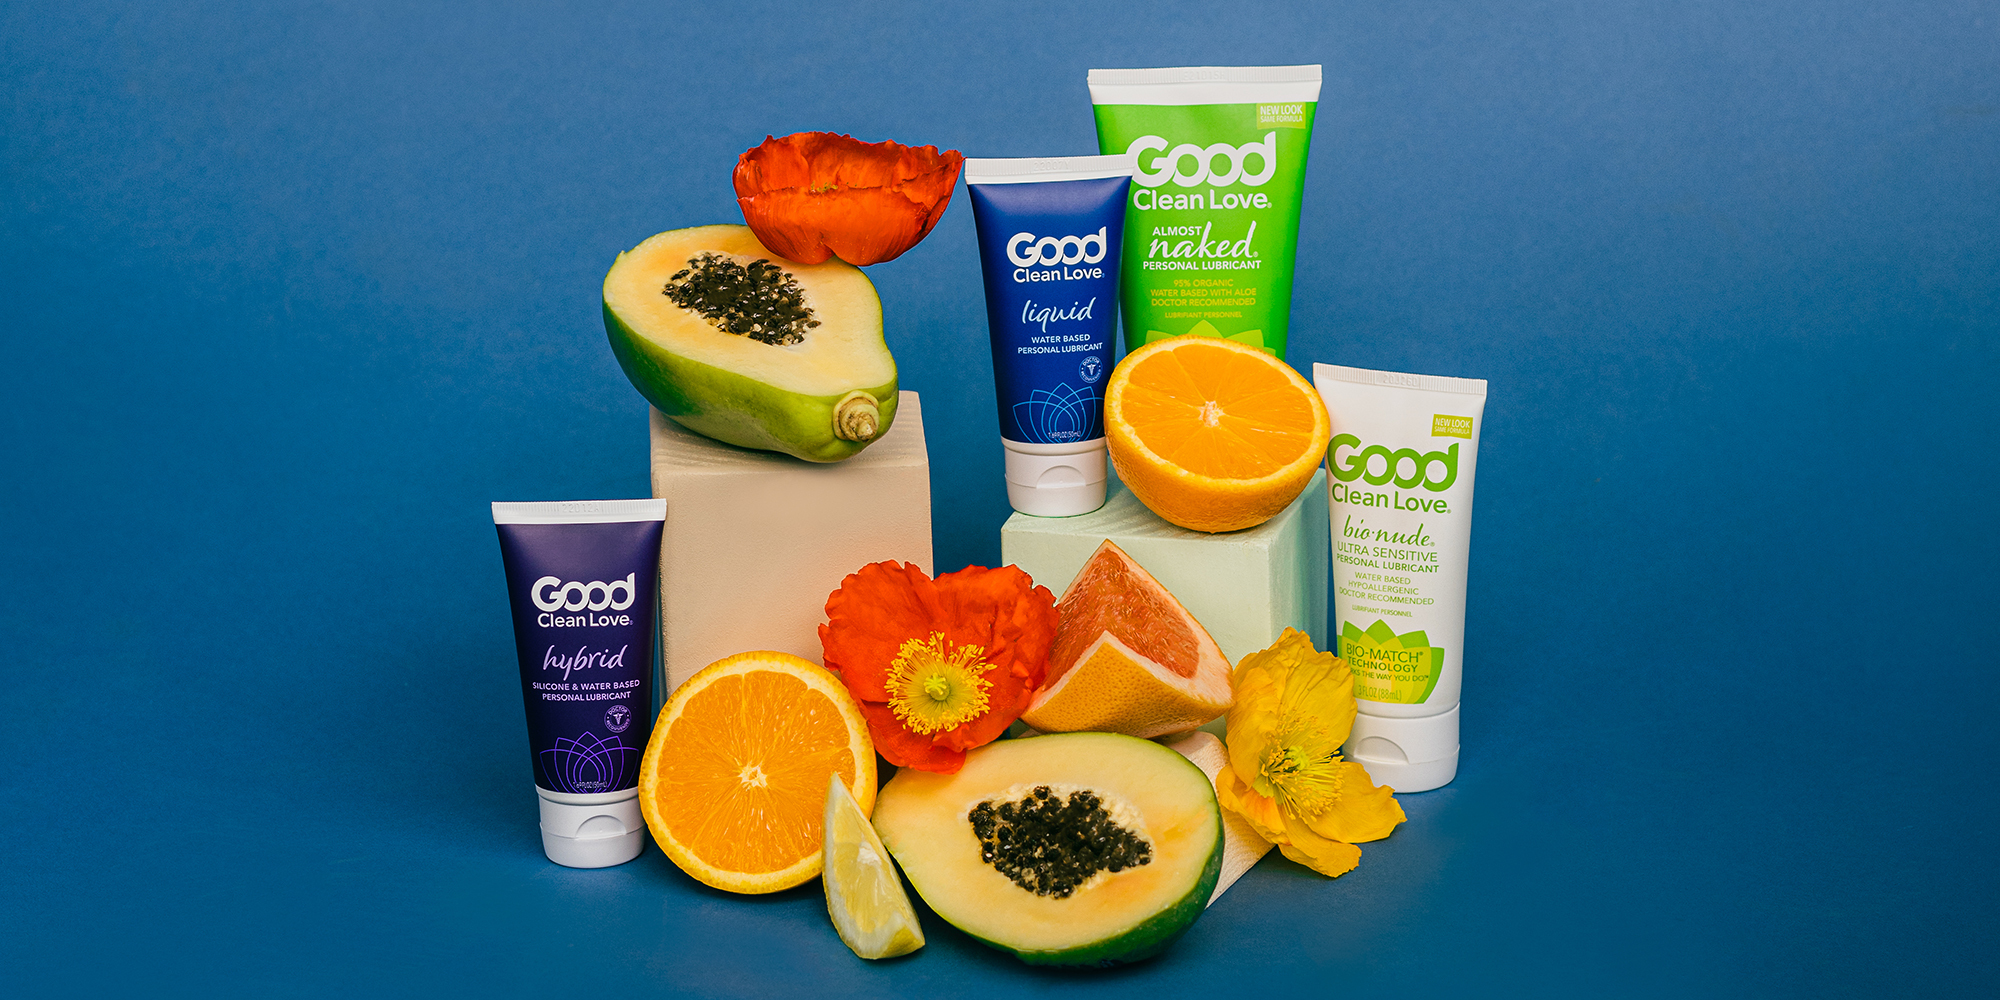 Good Clean Love Products